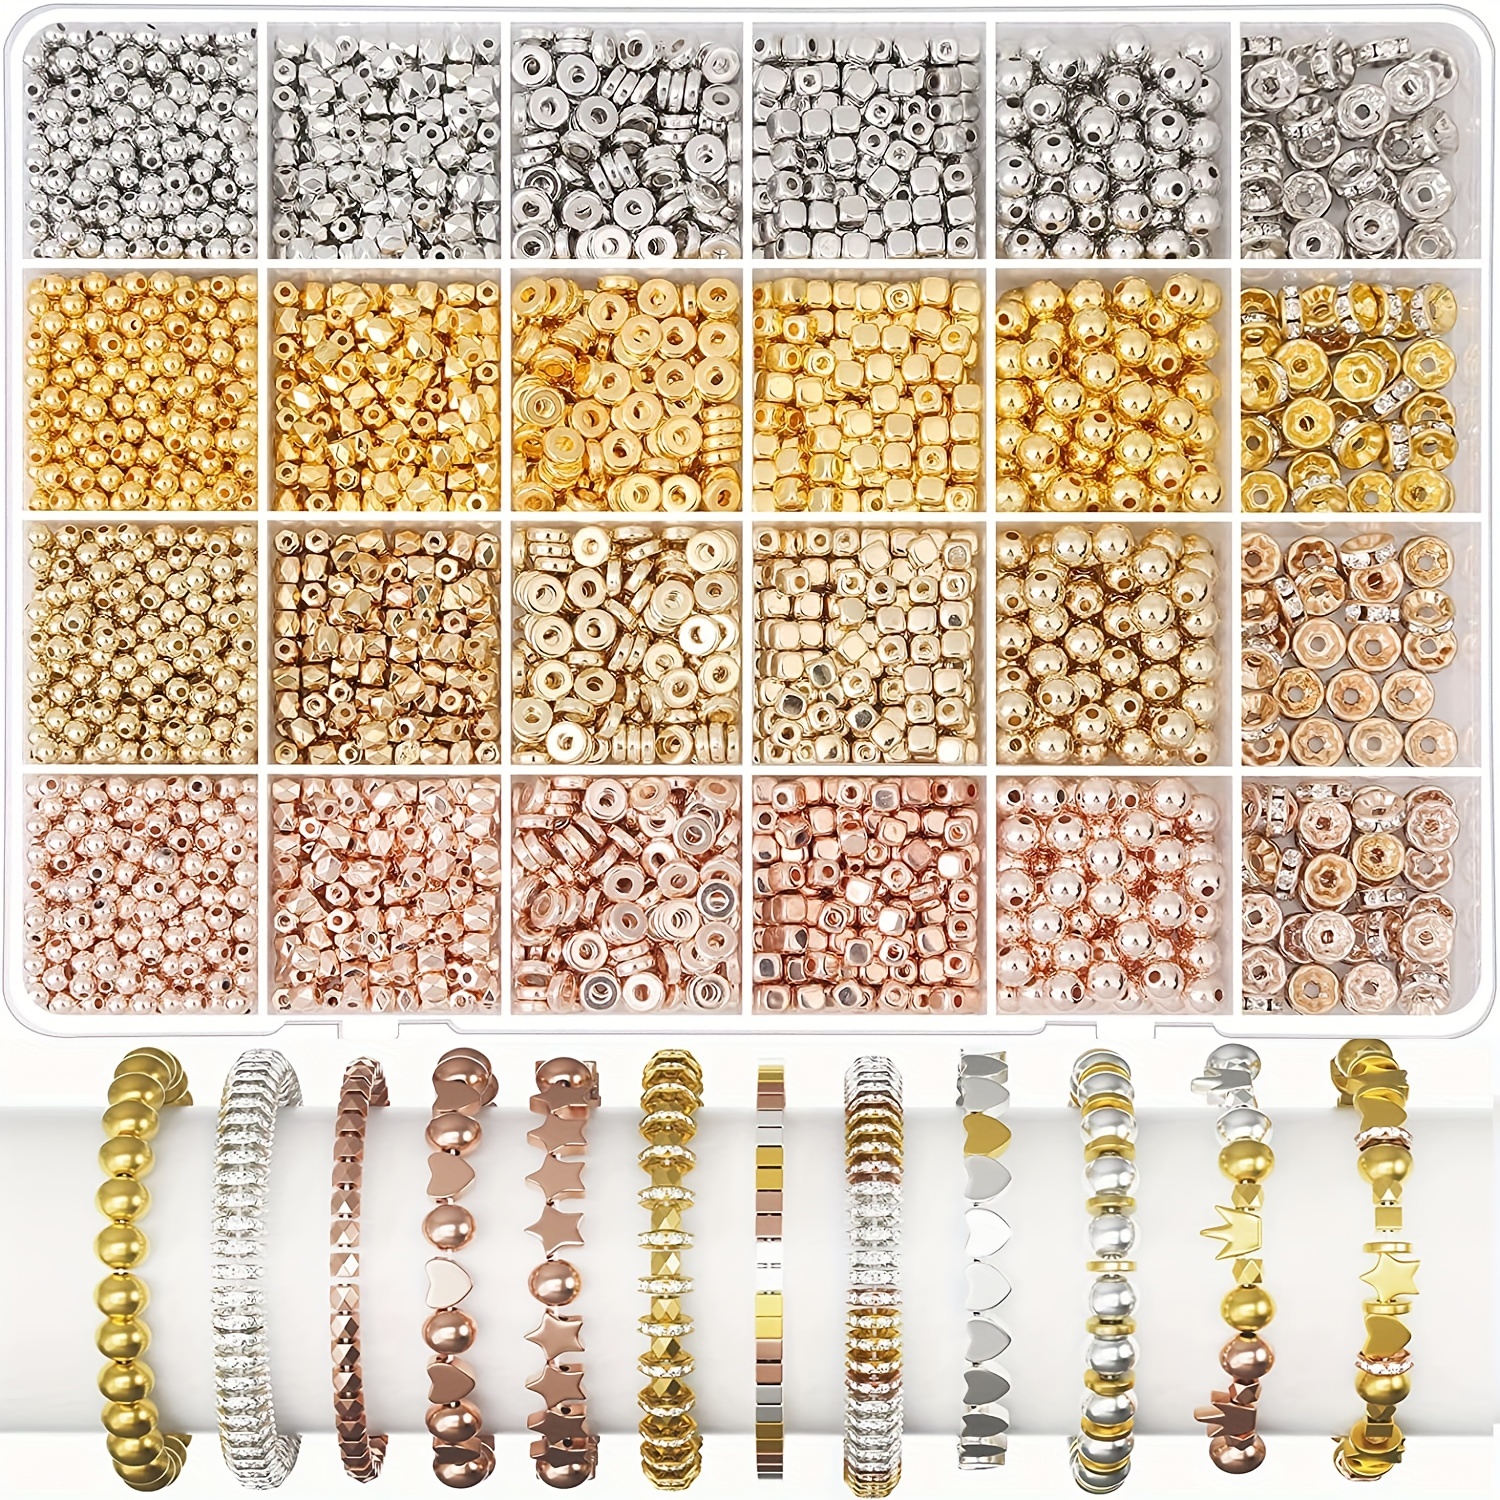 I have been looking forever for those spacer beads I can't find any! Only  metal. Can anyone help find them?! Thank you!! : r/crafts